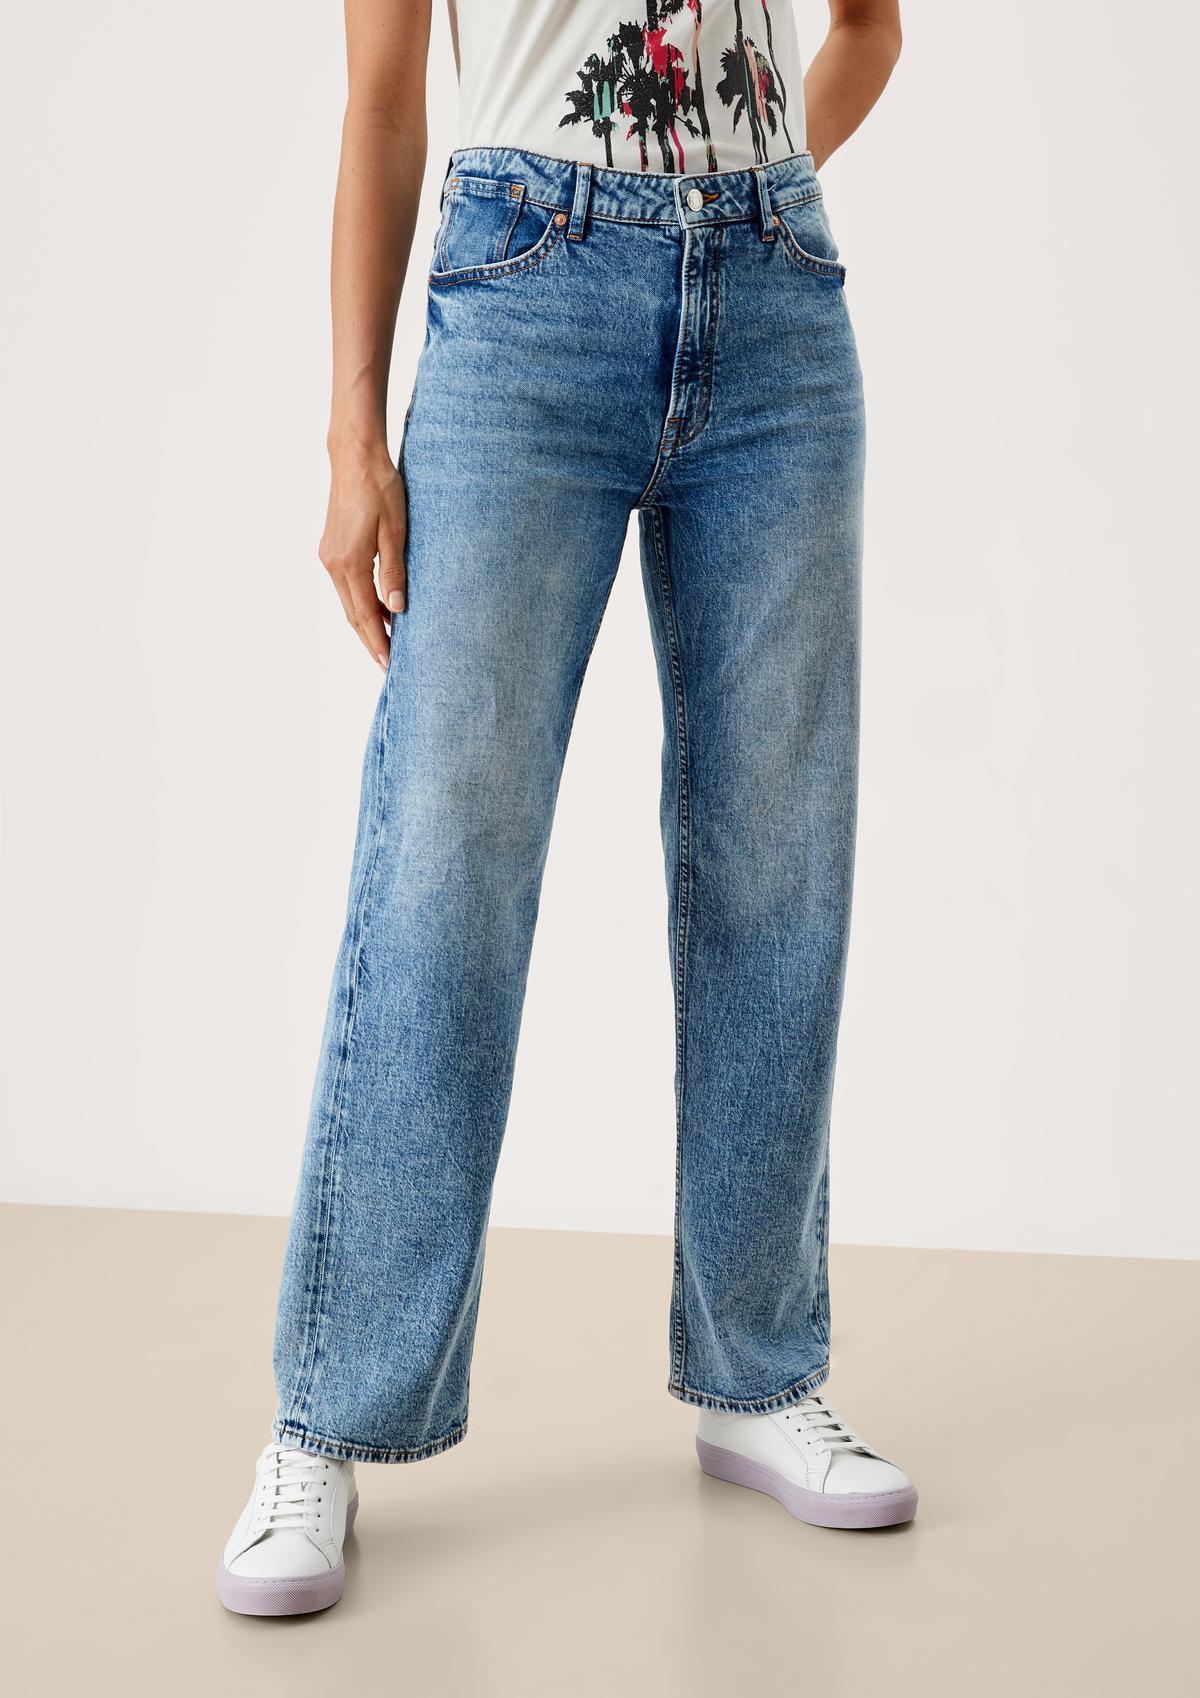 Jean longueur cheville Franciz / Relaxed Fit / taille mi-haute / Tapered Leg